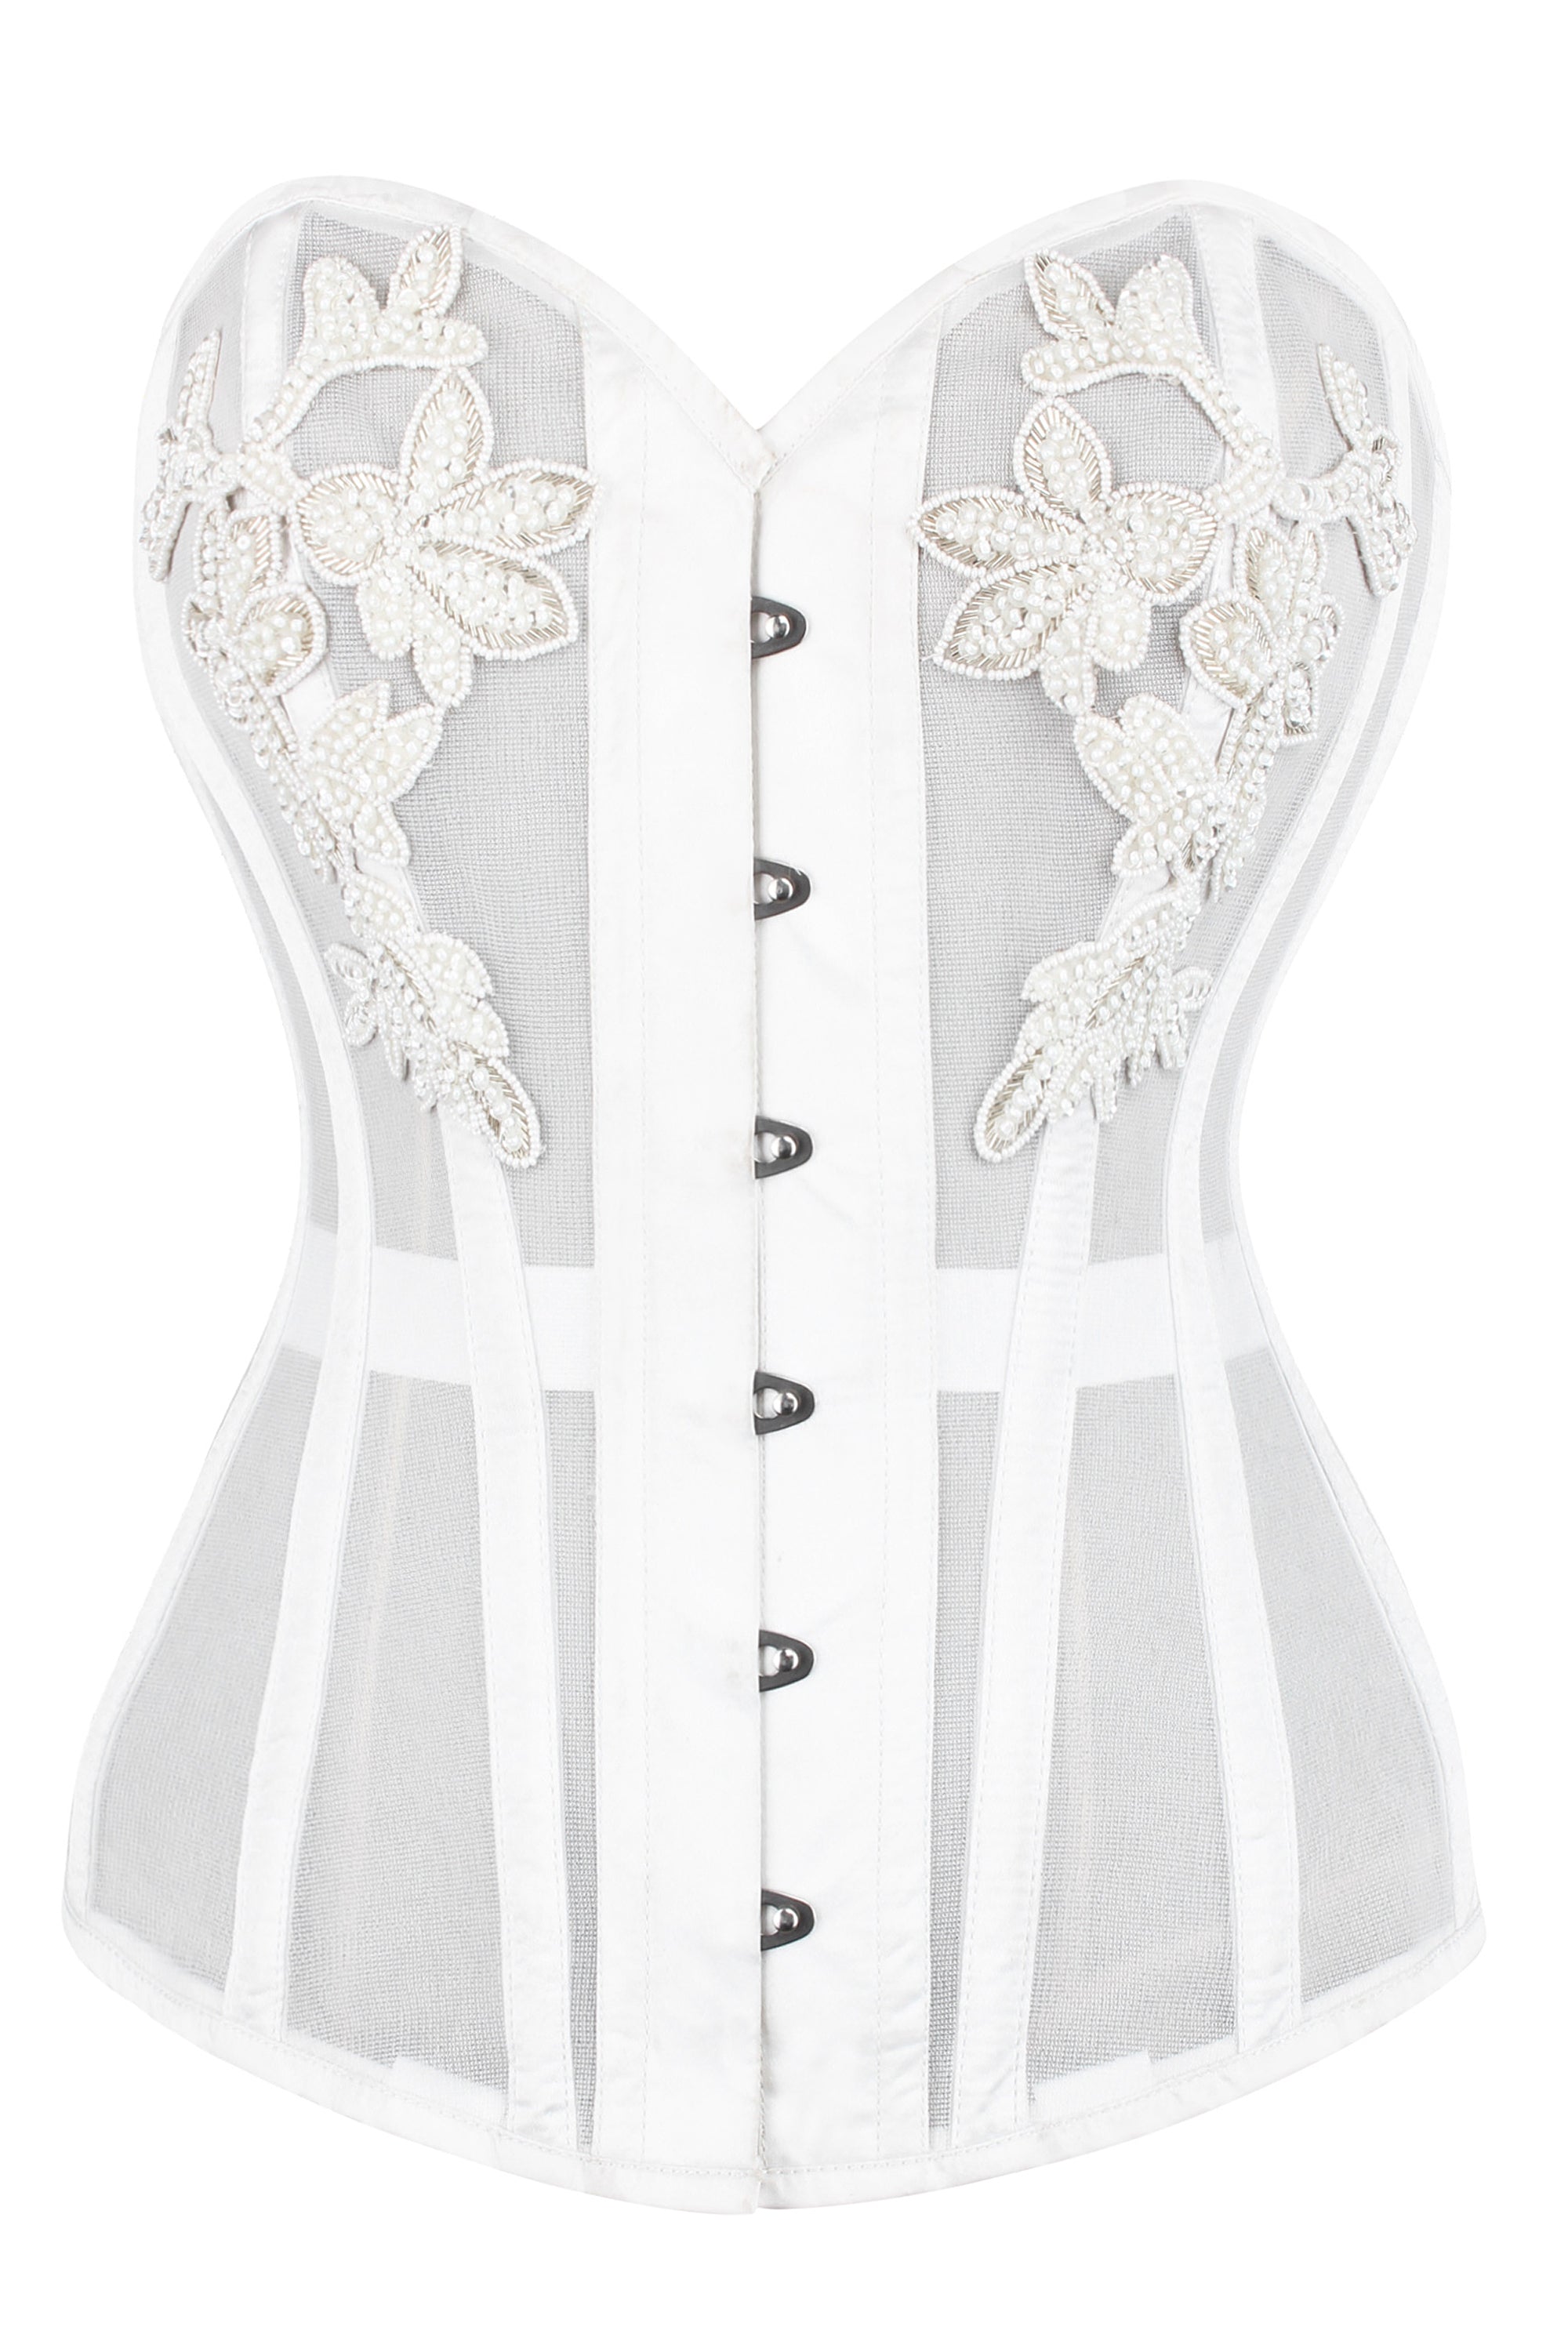 Gisselle Underbust Corset w/ White Embroidery